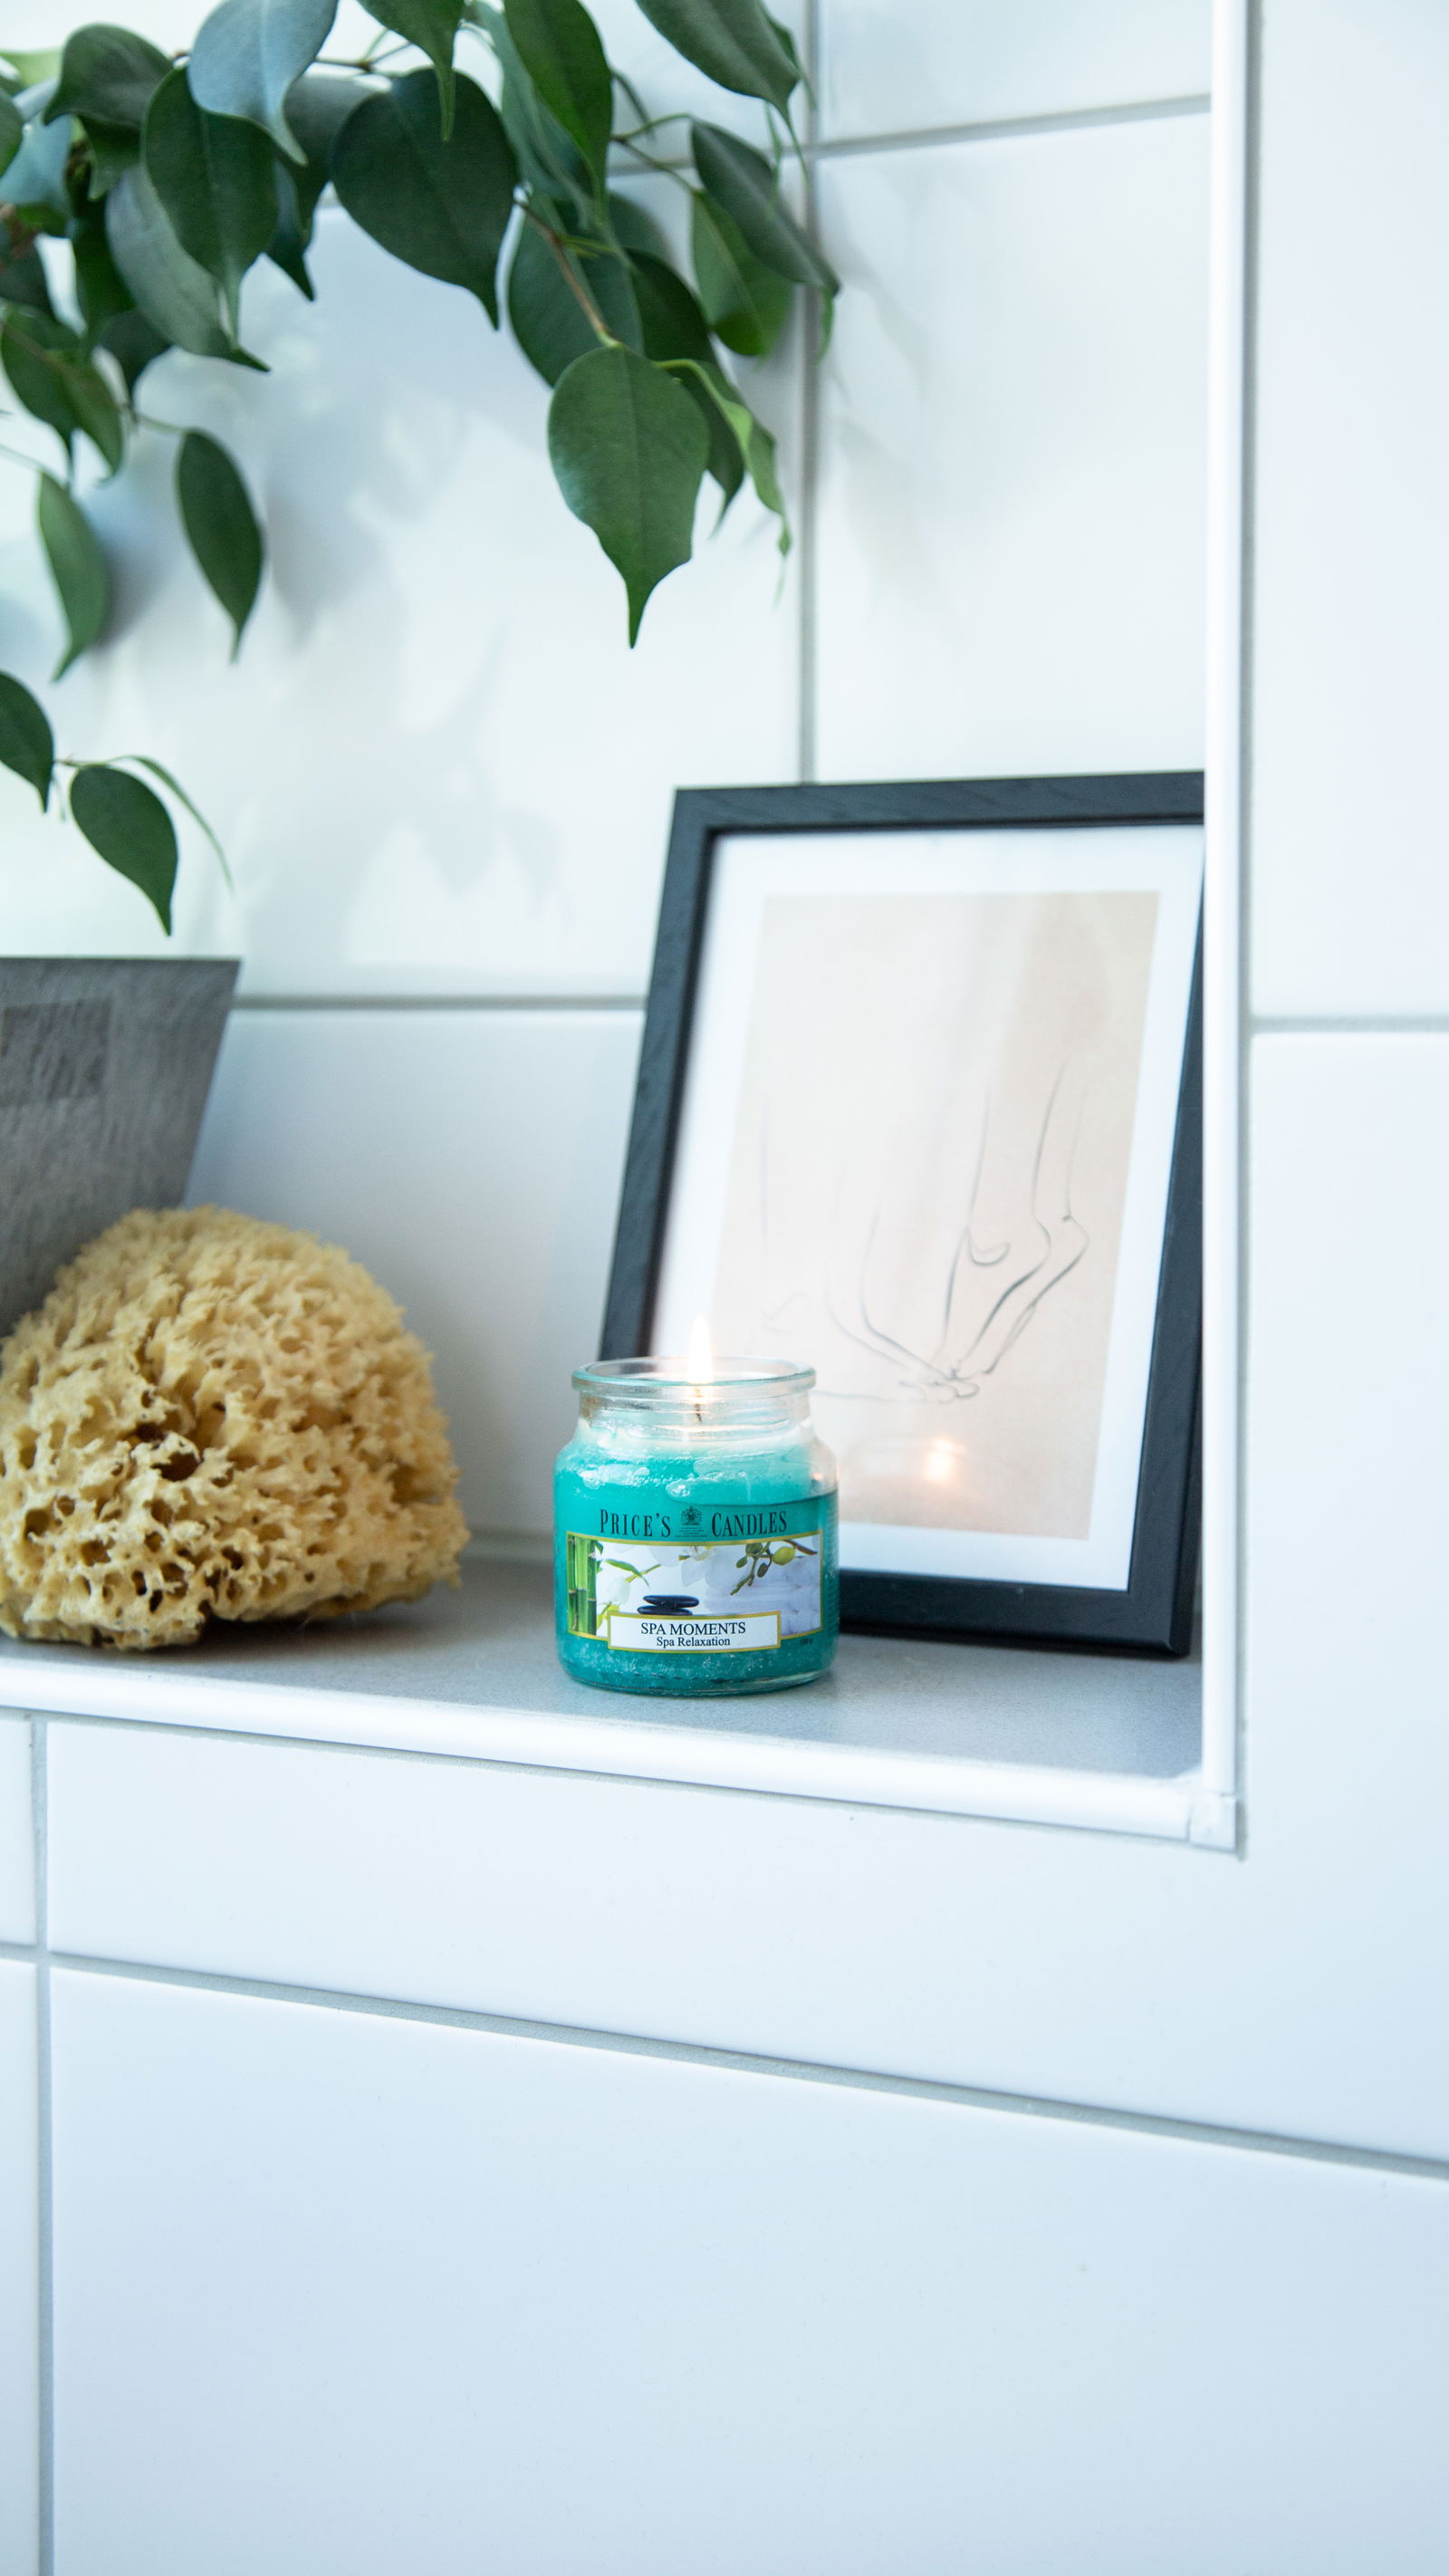 Spa Moments 100g